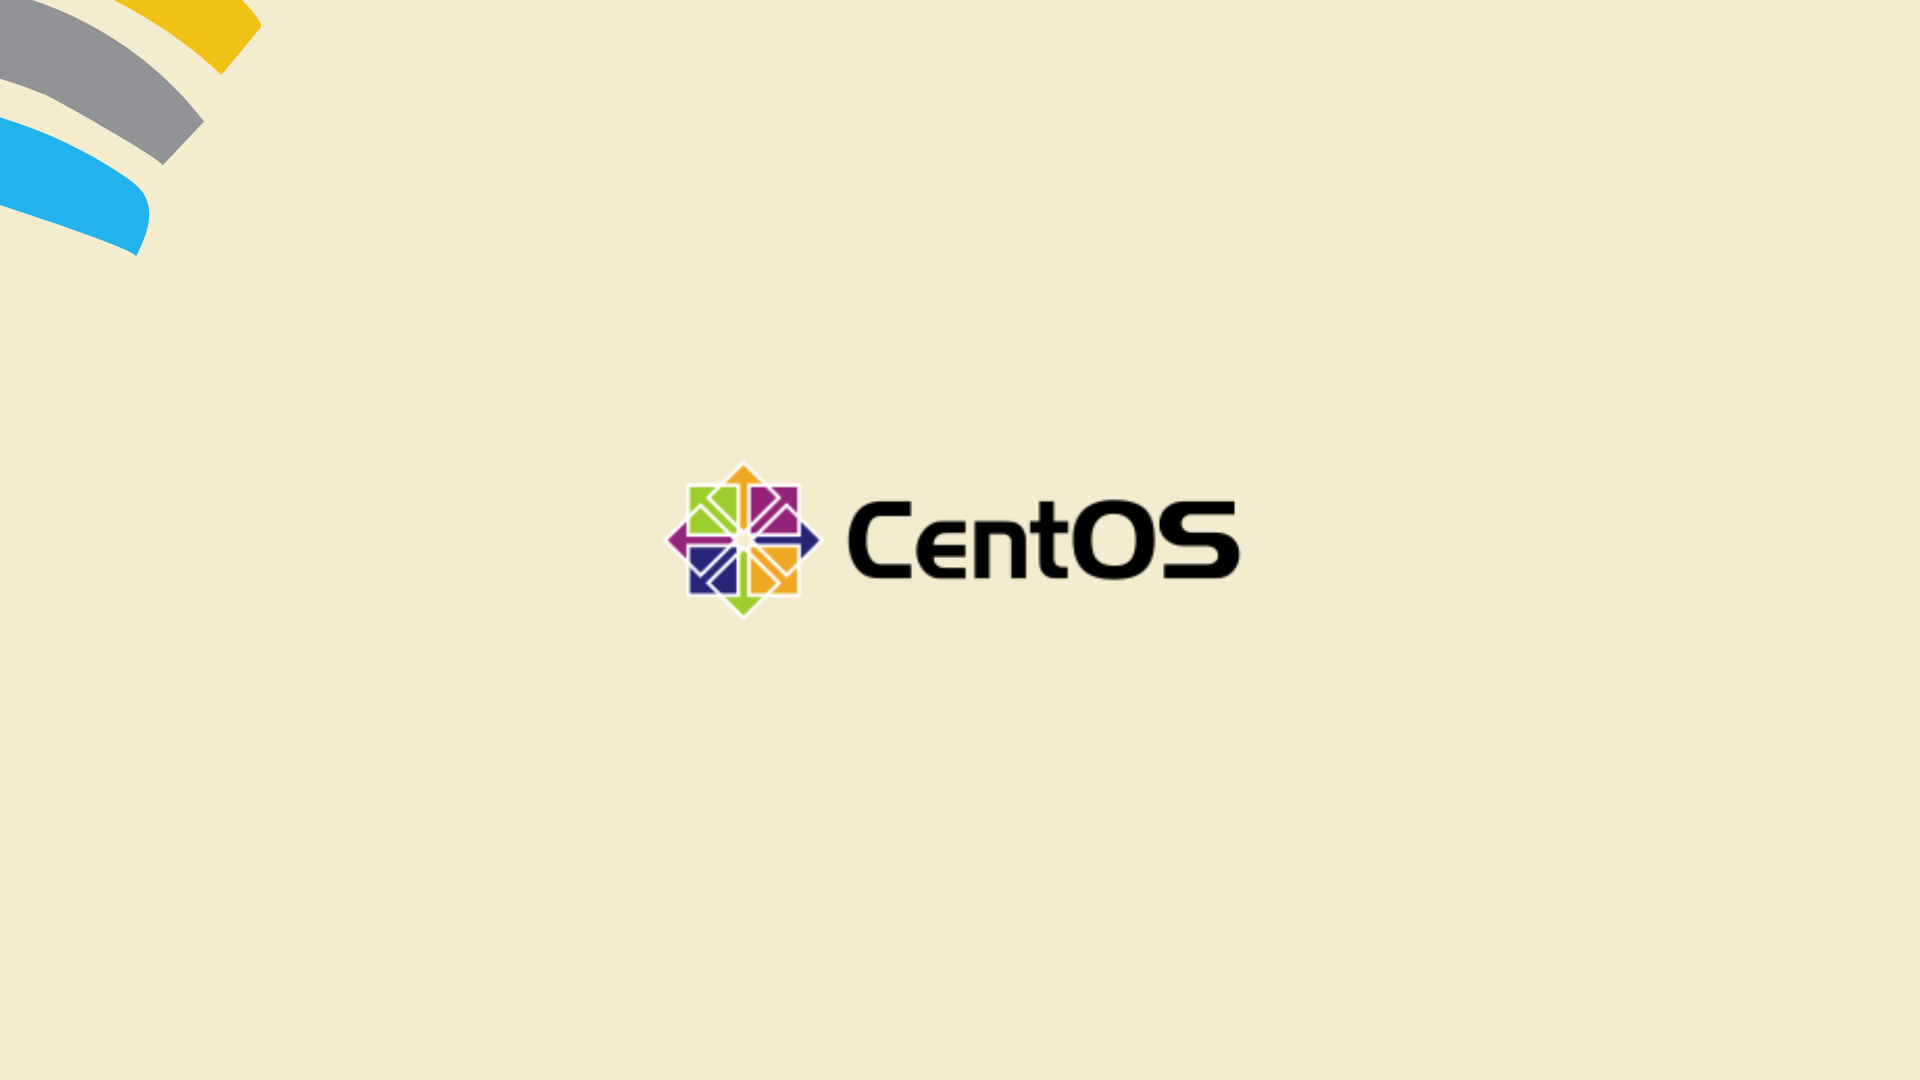 CentOS 7 and CentOS 8: The Ideal Choices for Your VPS — Now Free with LinkData.com